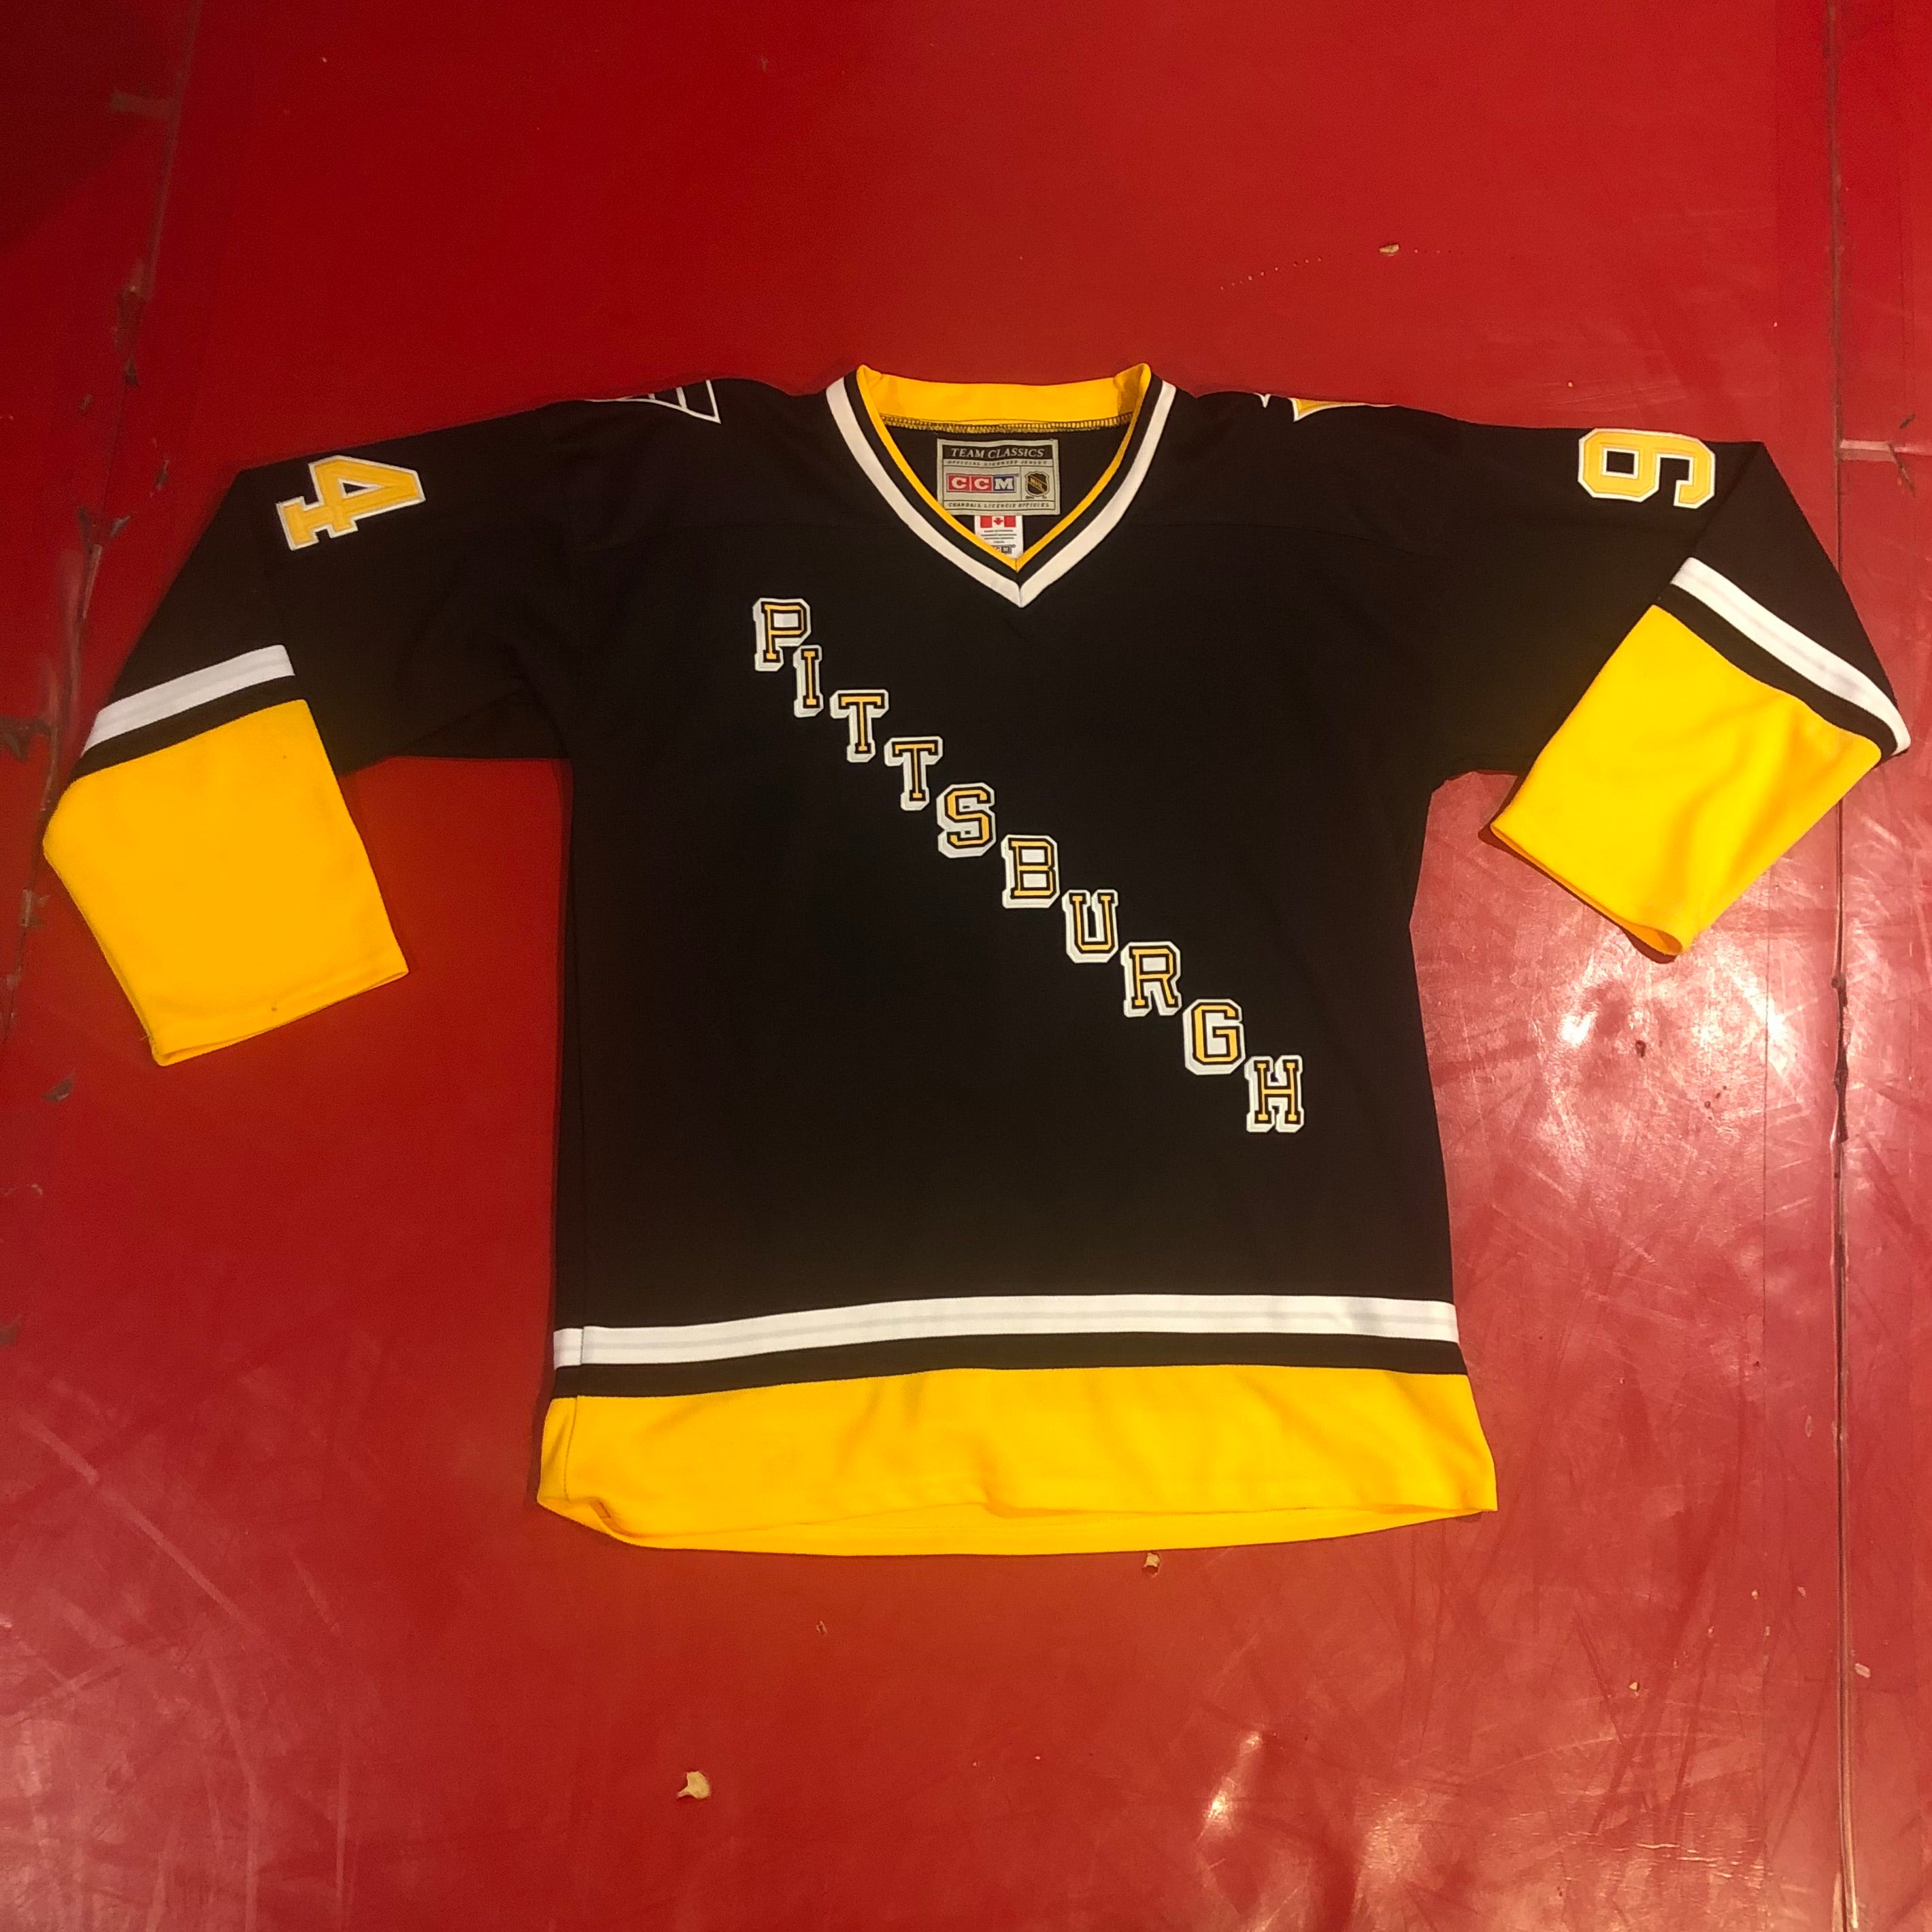 1994 Snoop Dogg Gin and Juice Pittsburgh Penguins Jersey